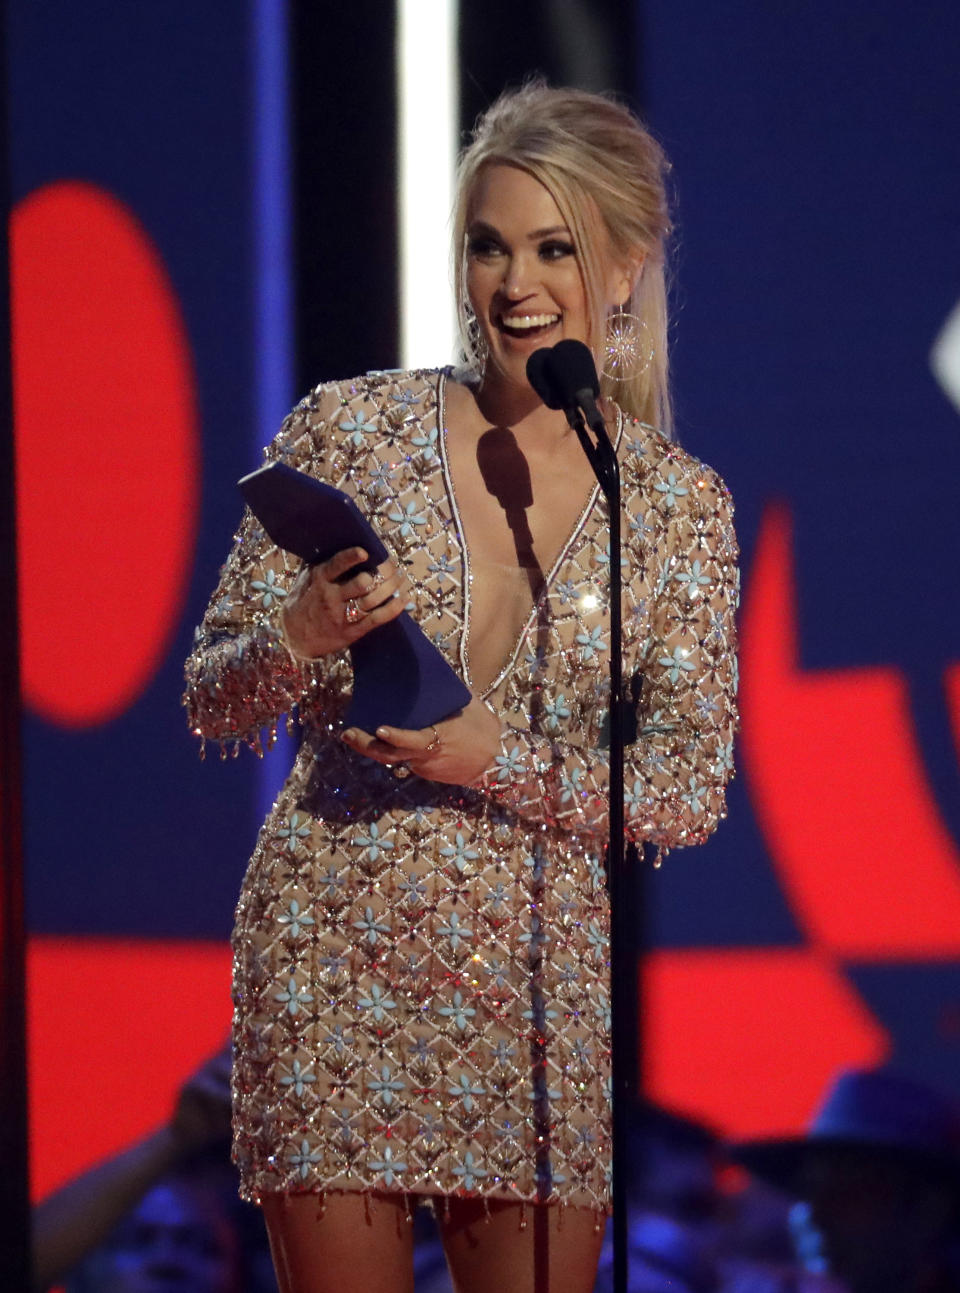 Carrie Underwood accepts the award for female video of the year for "Love Wins" at the CMT Music Awards on Wednesday, June 5, 2019, at the Bridgestone Arena in Nashville, Tenn. (AP Photo/Mark Humphrey)